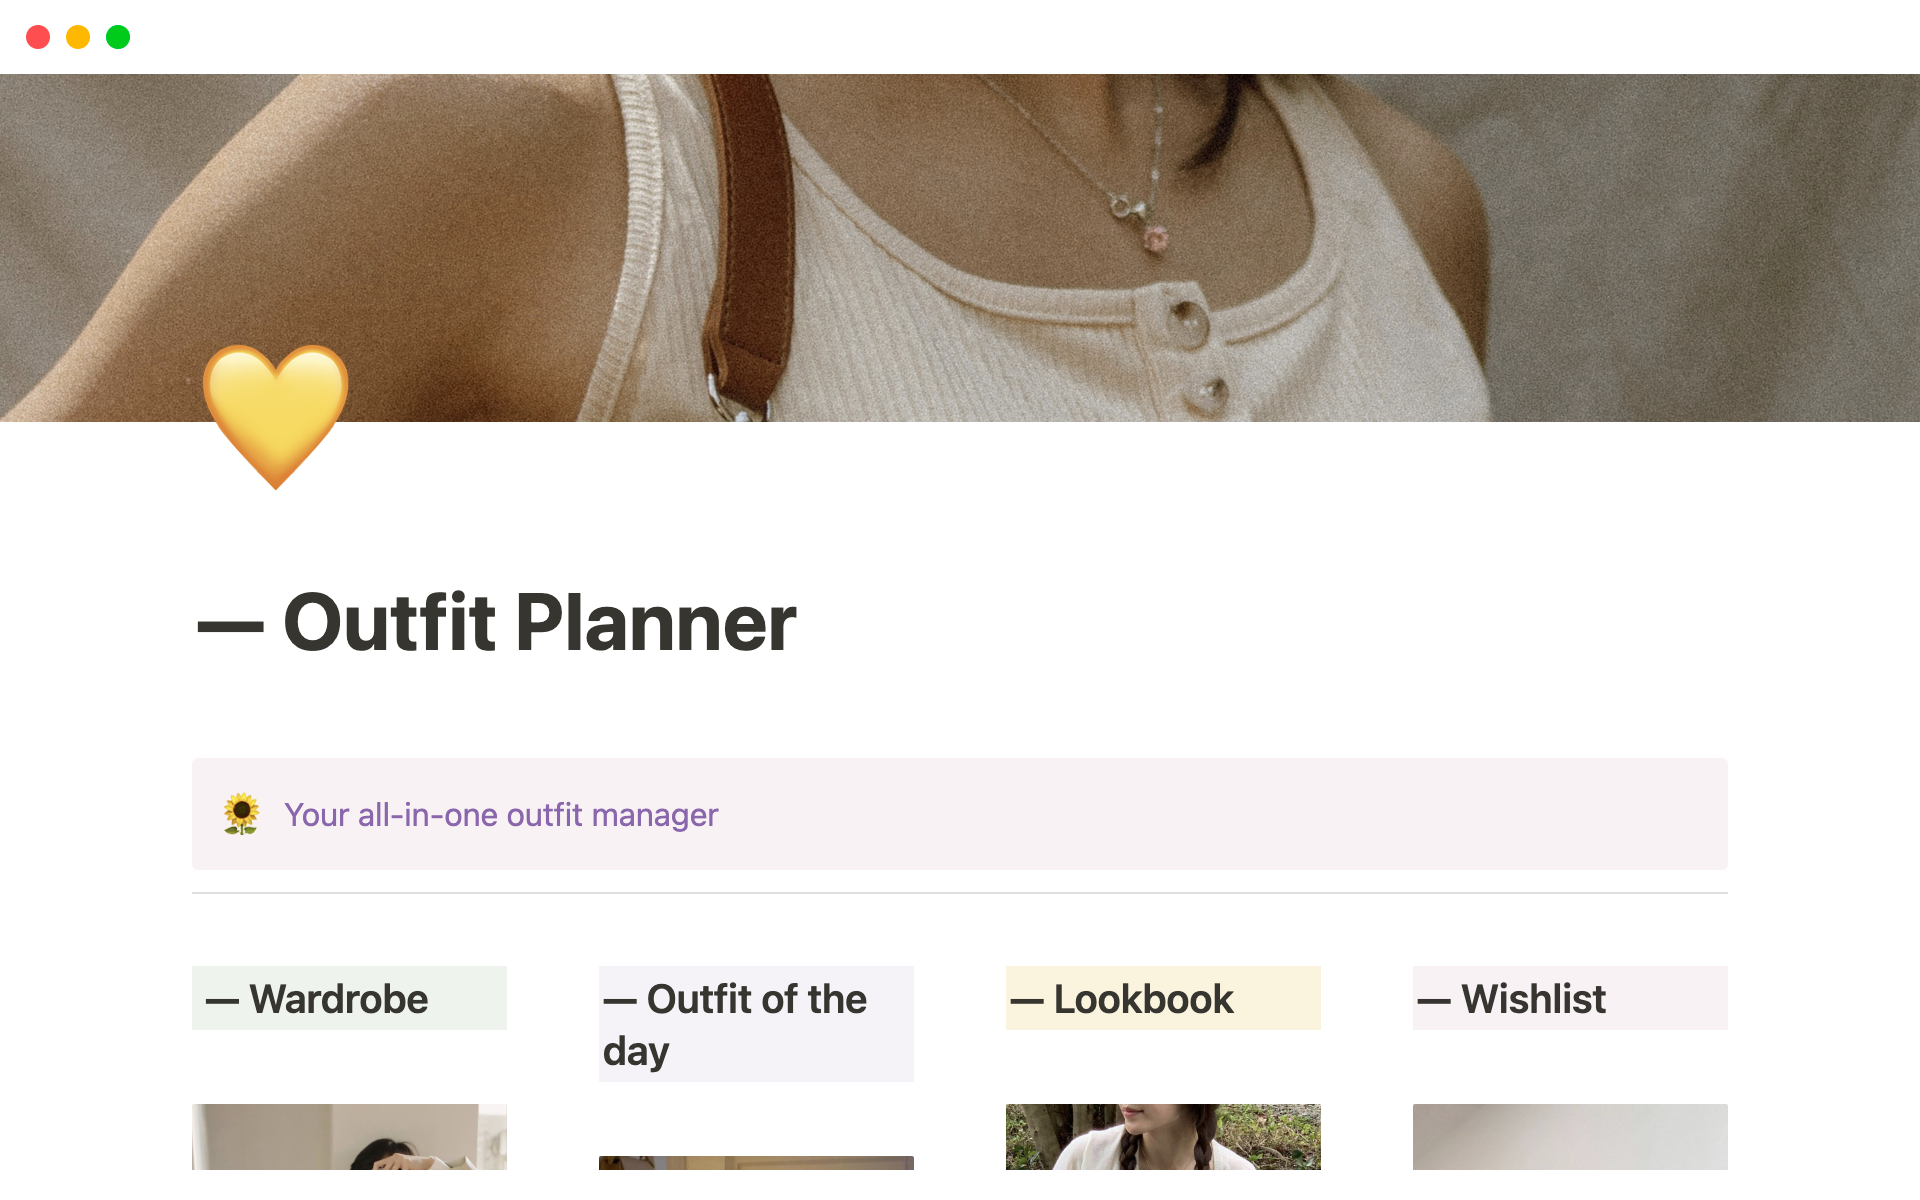 You can manage your day-to-day outfit and your wardrobe in this notion template